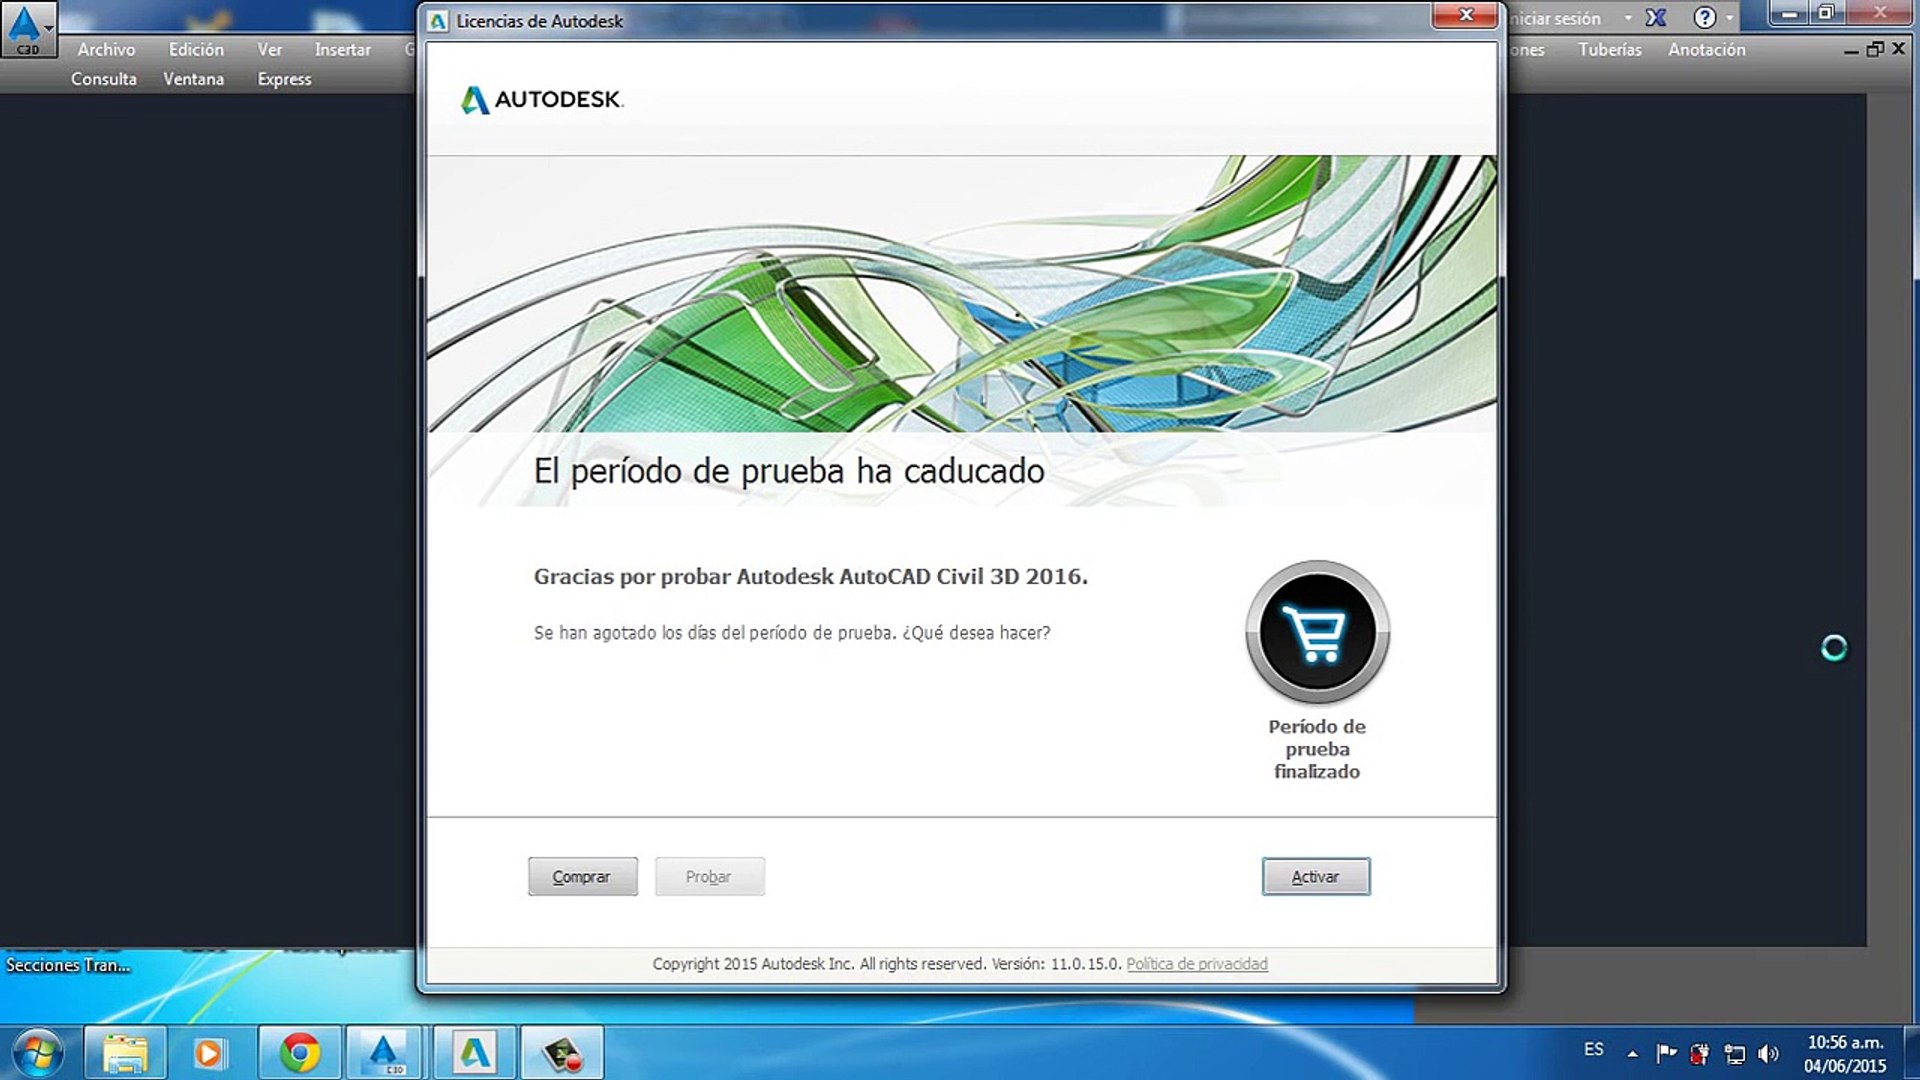 Autodesk inventor 2010 free download with crack windows